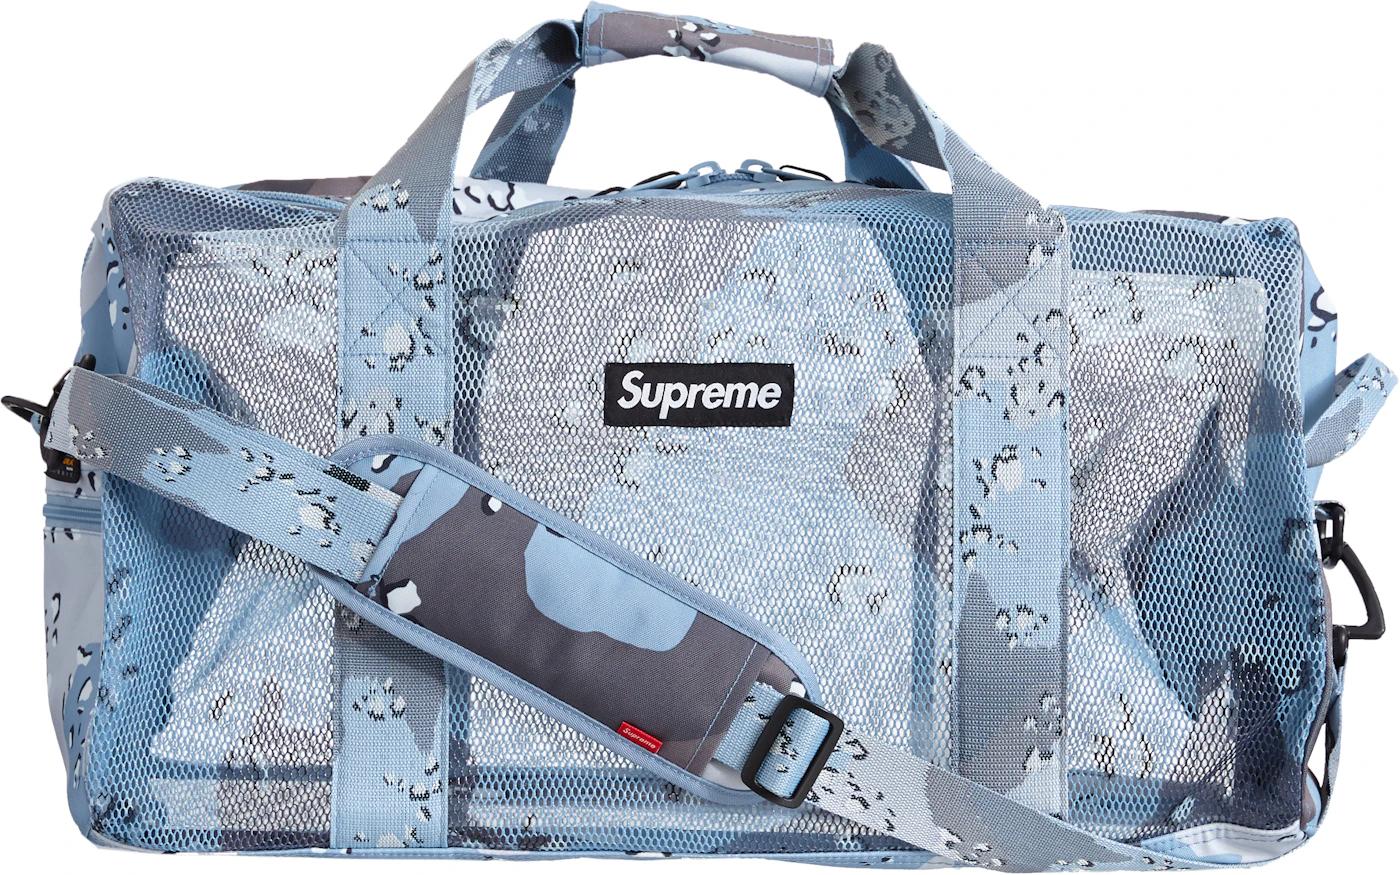 NEW #SUPREME MINI DUFFLE SS20 UNBOXING/REVIEW 